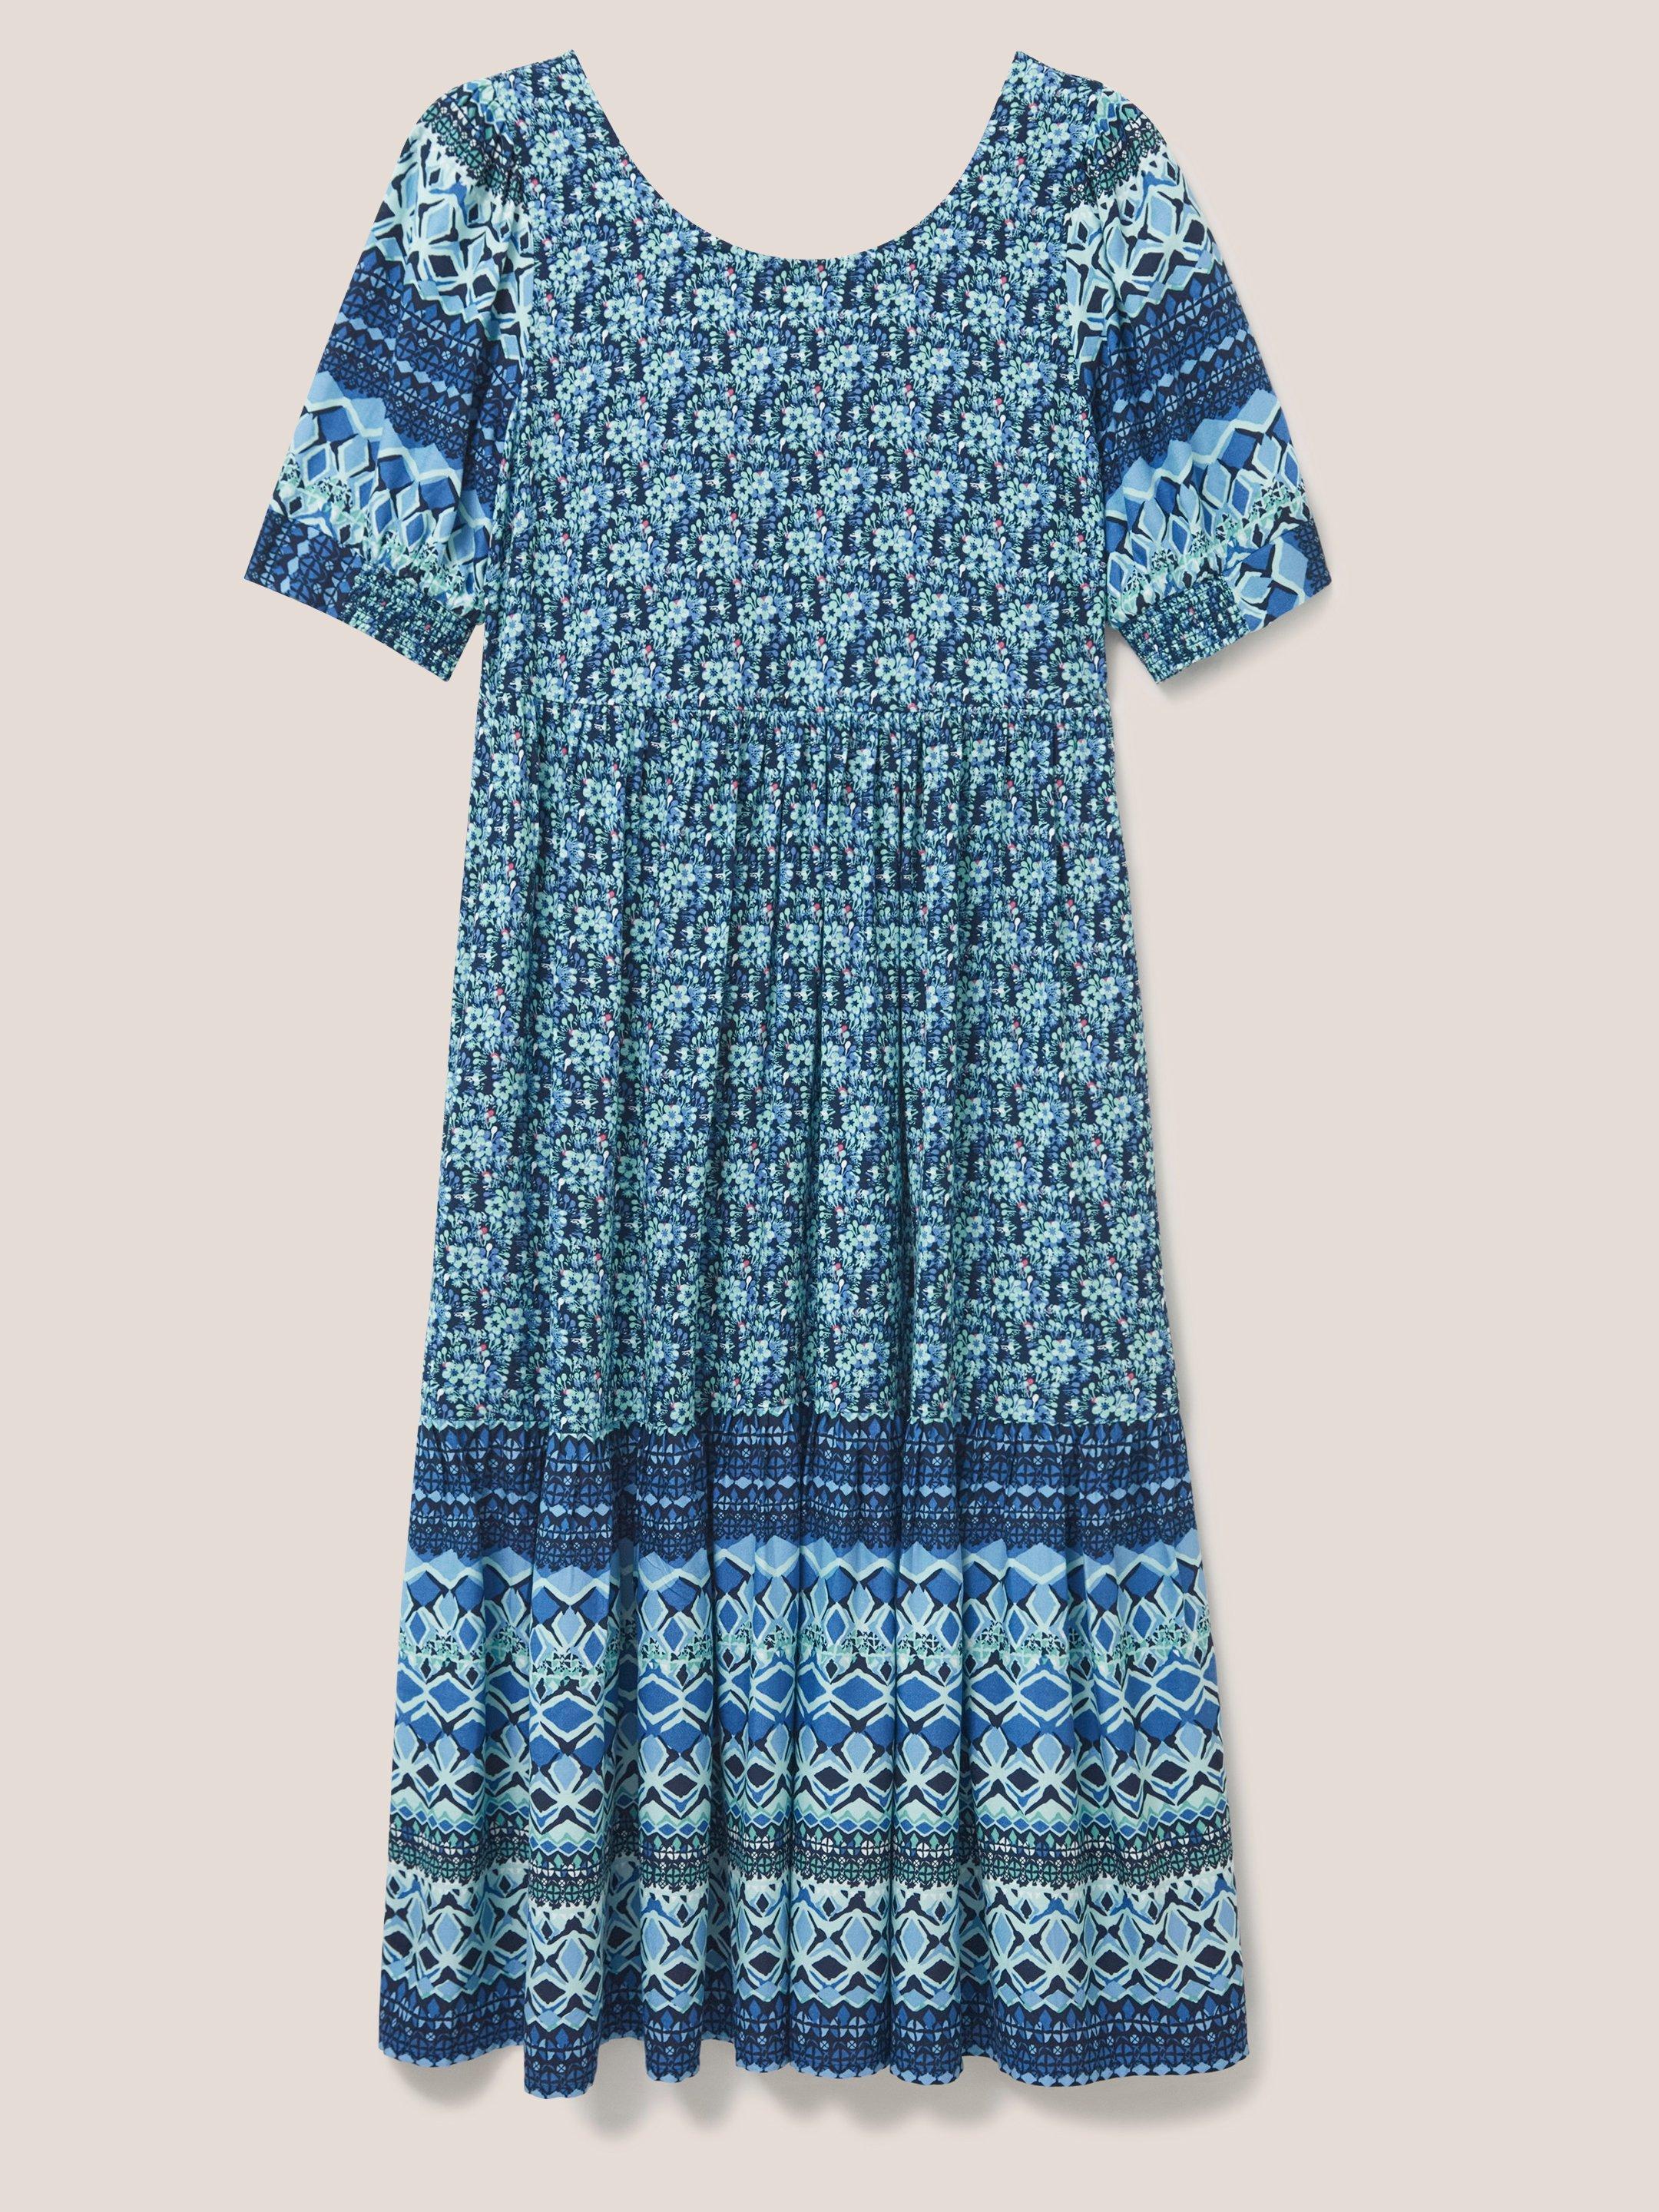 White Stuff Maya Tiered Shirt Dress in Teal Multi - the Old Byre